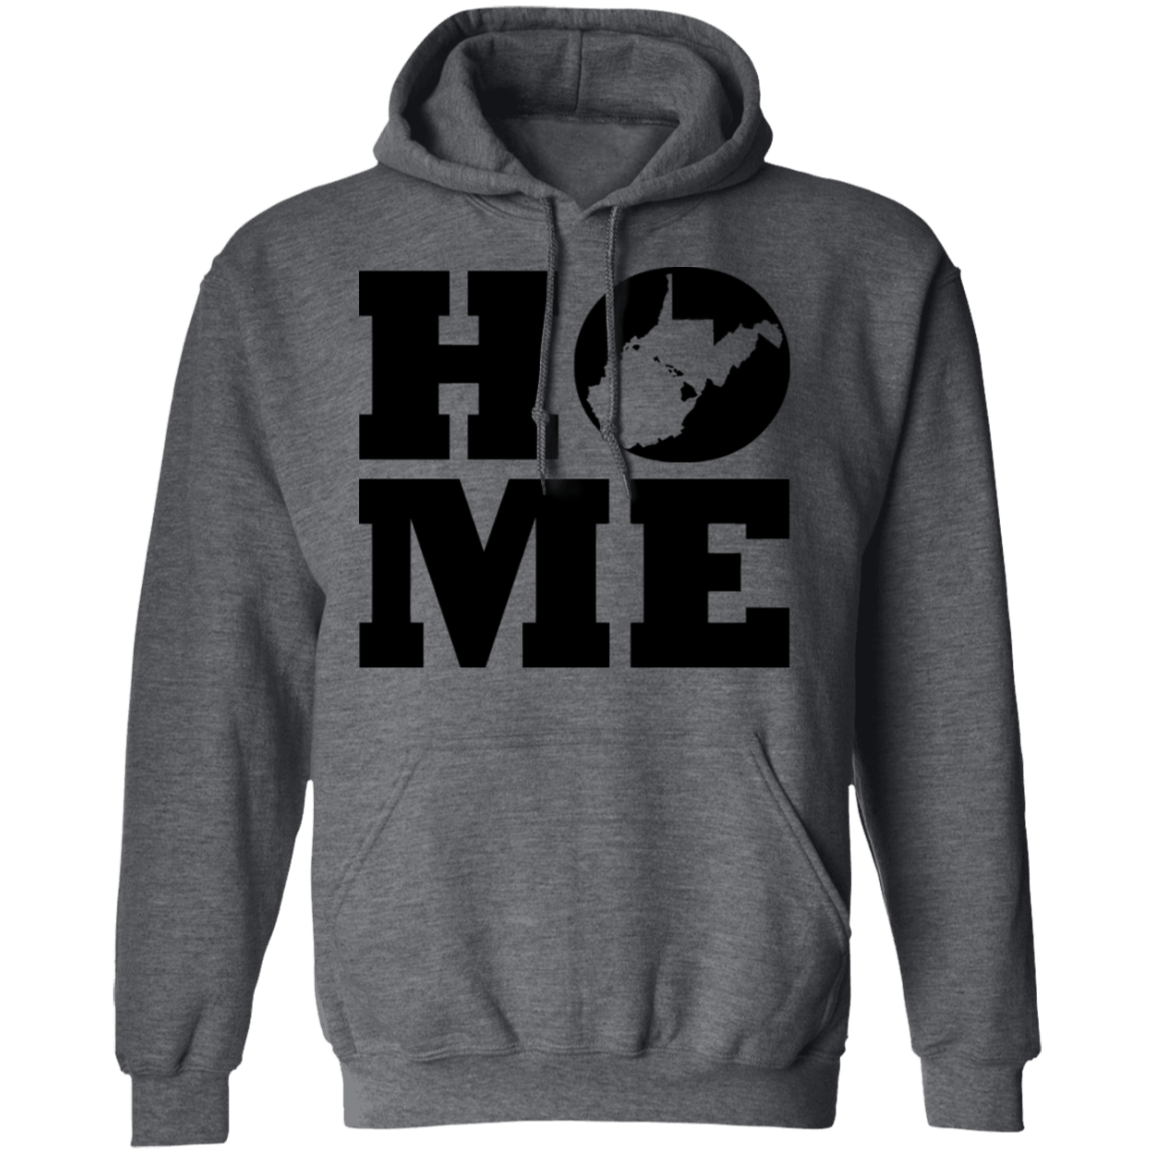 Home Roots Hawai'i and West Virginia Pullover Hoodie